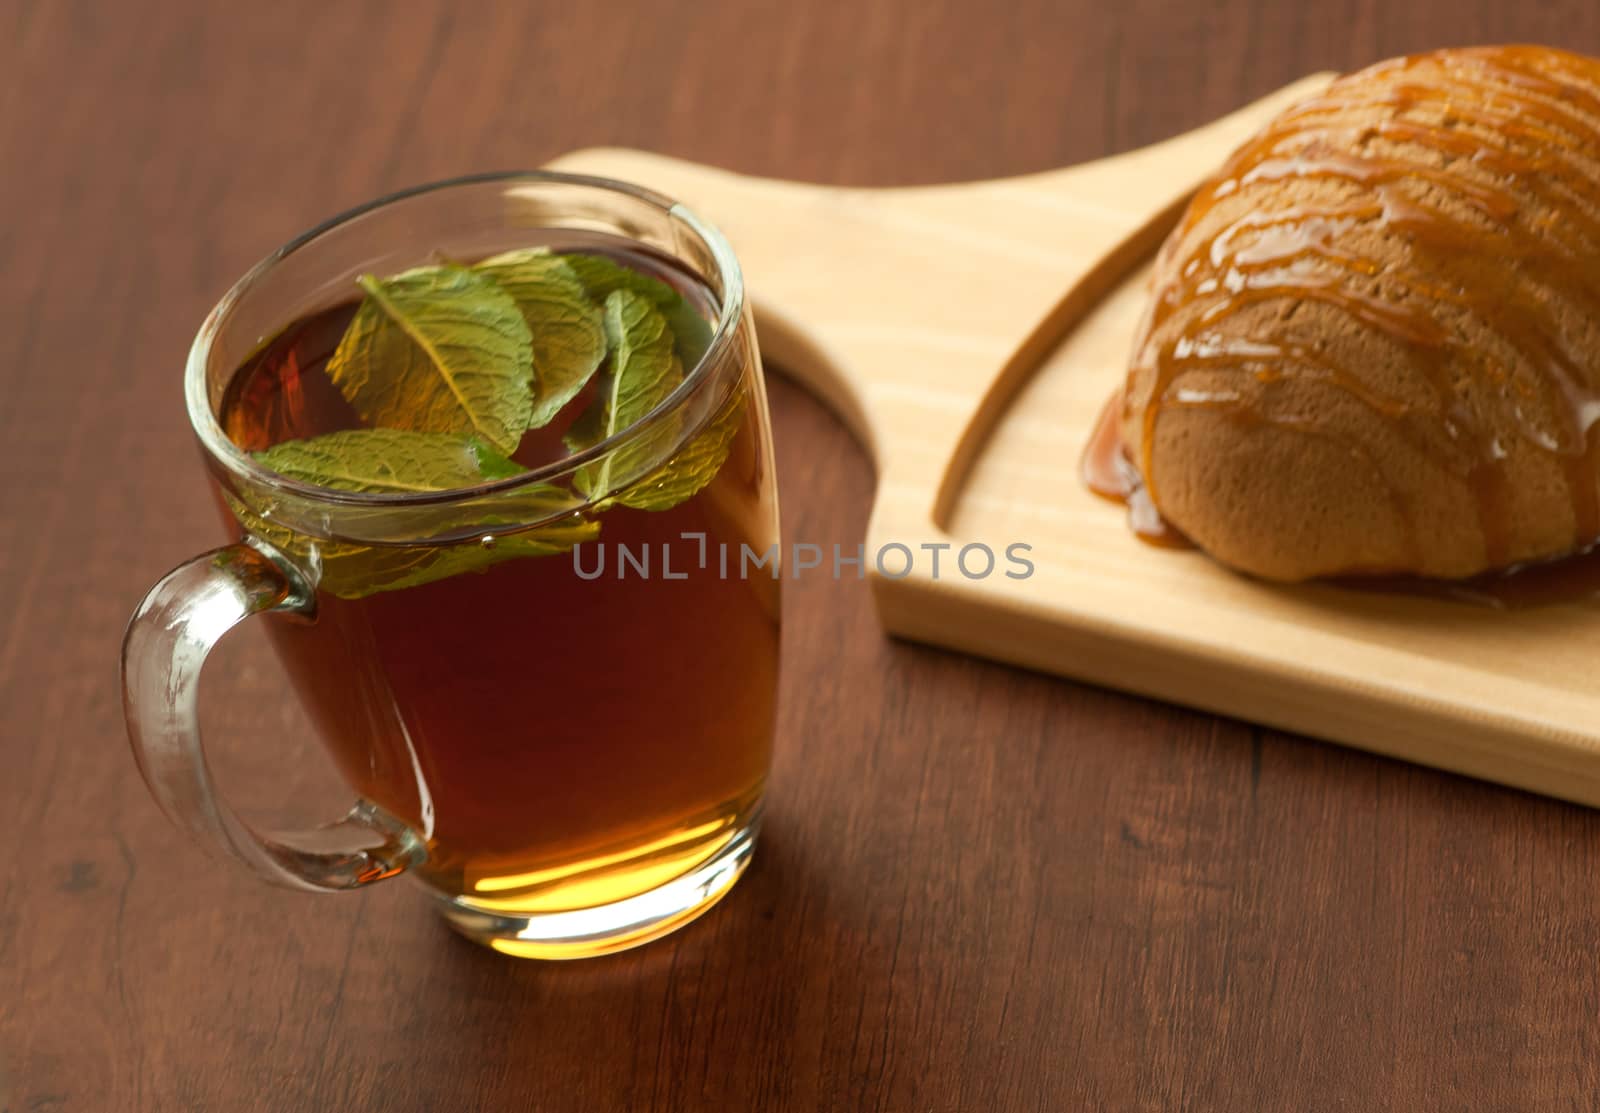 bread drizzled with honey on a wooden plate and a glass of black tea with leaf